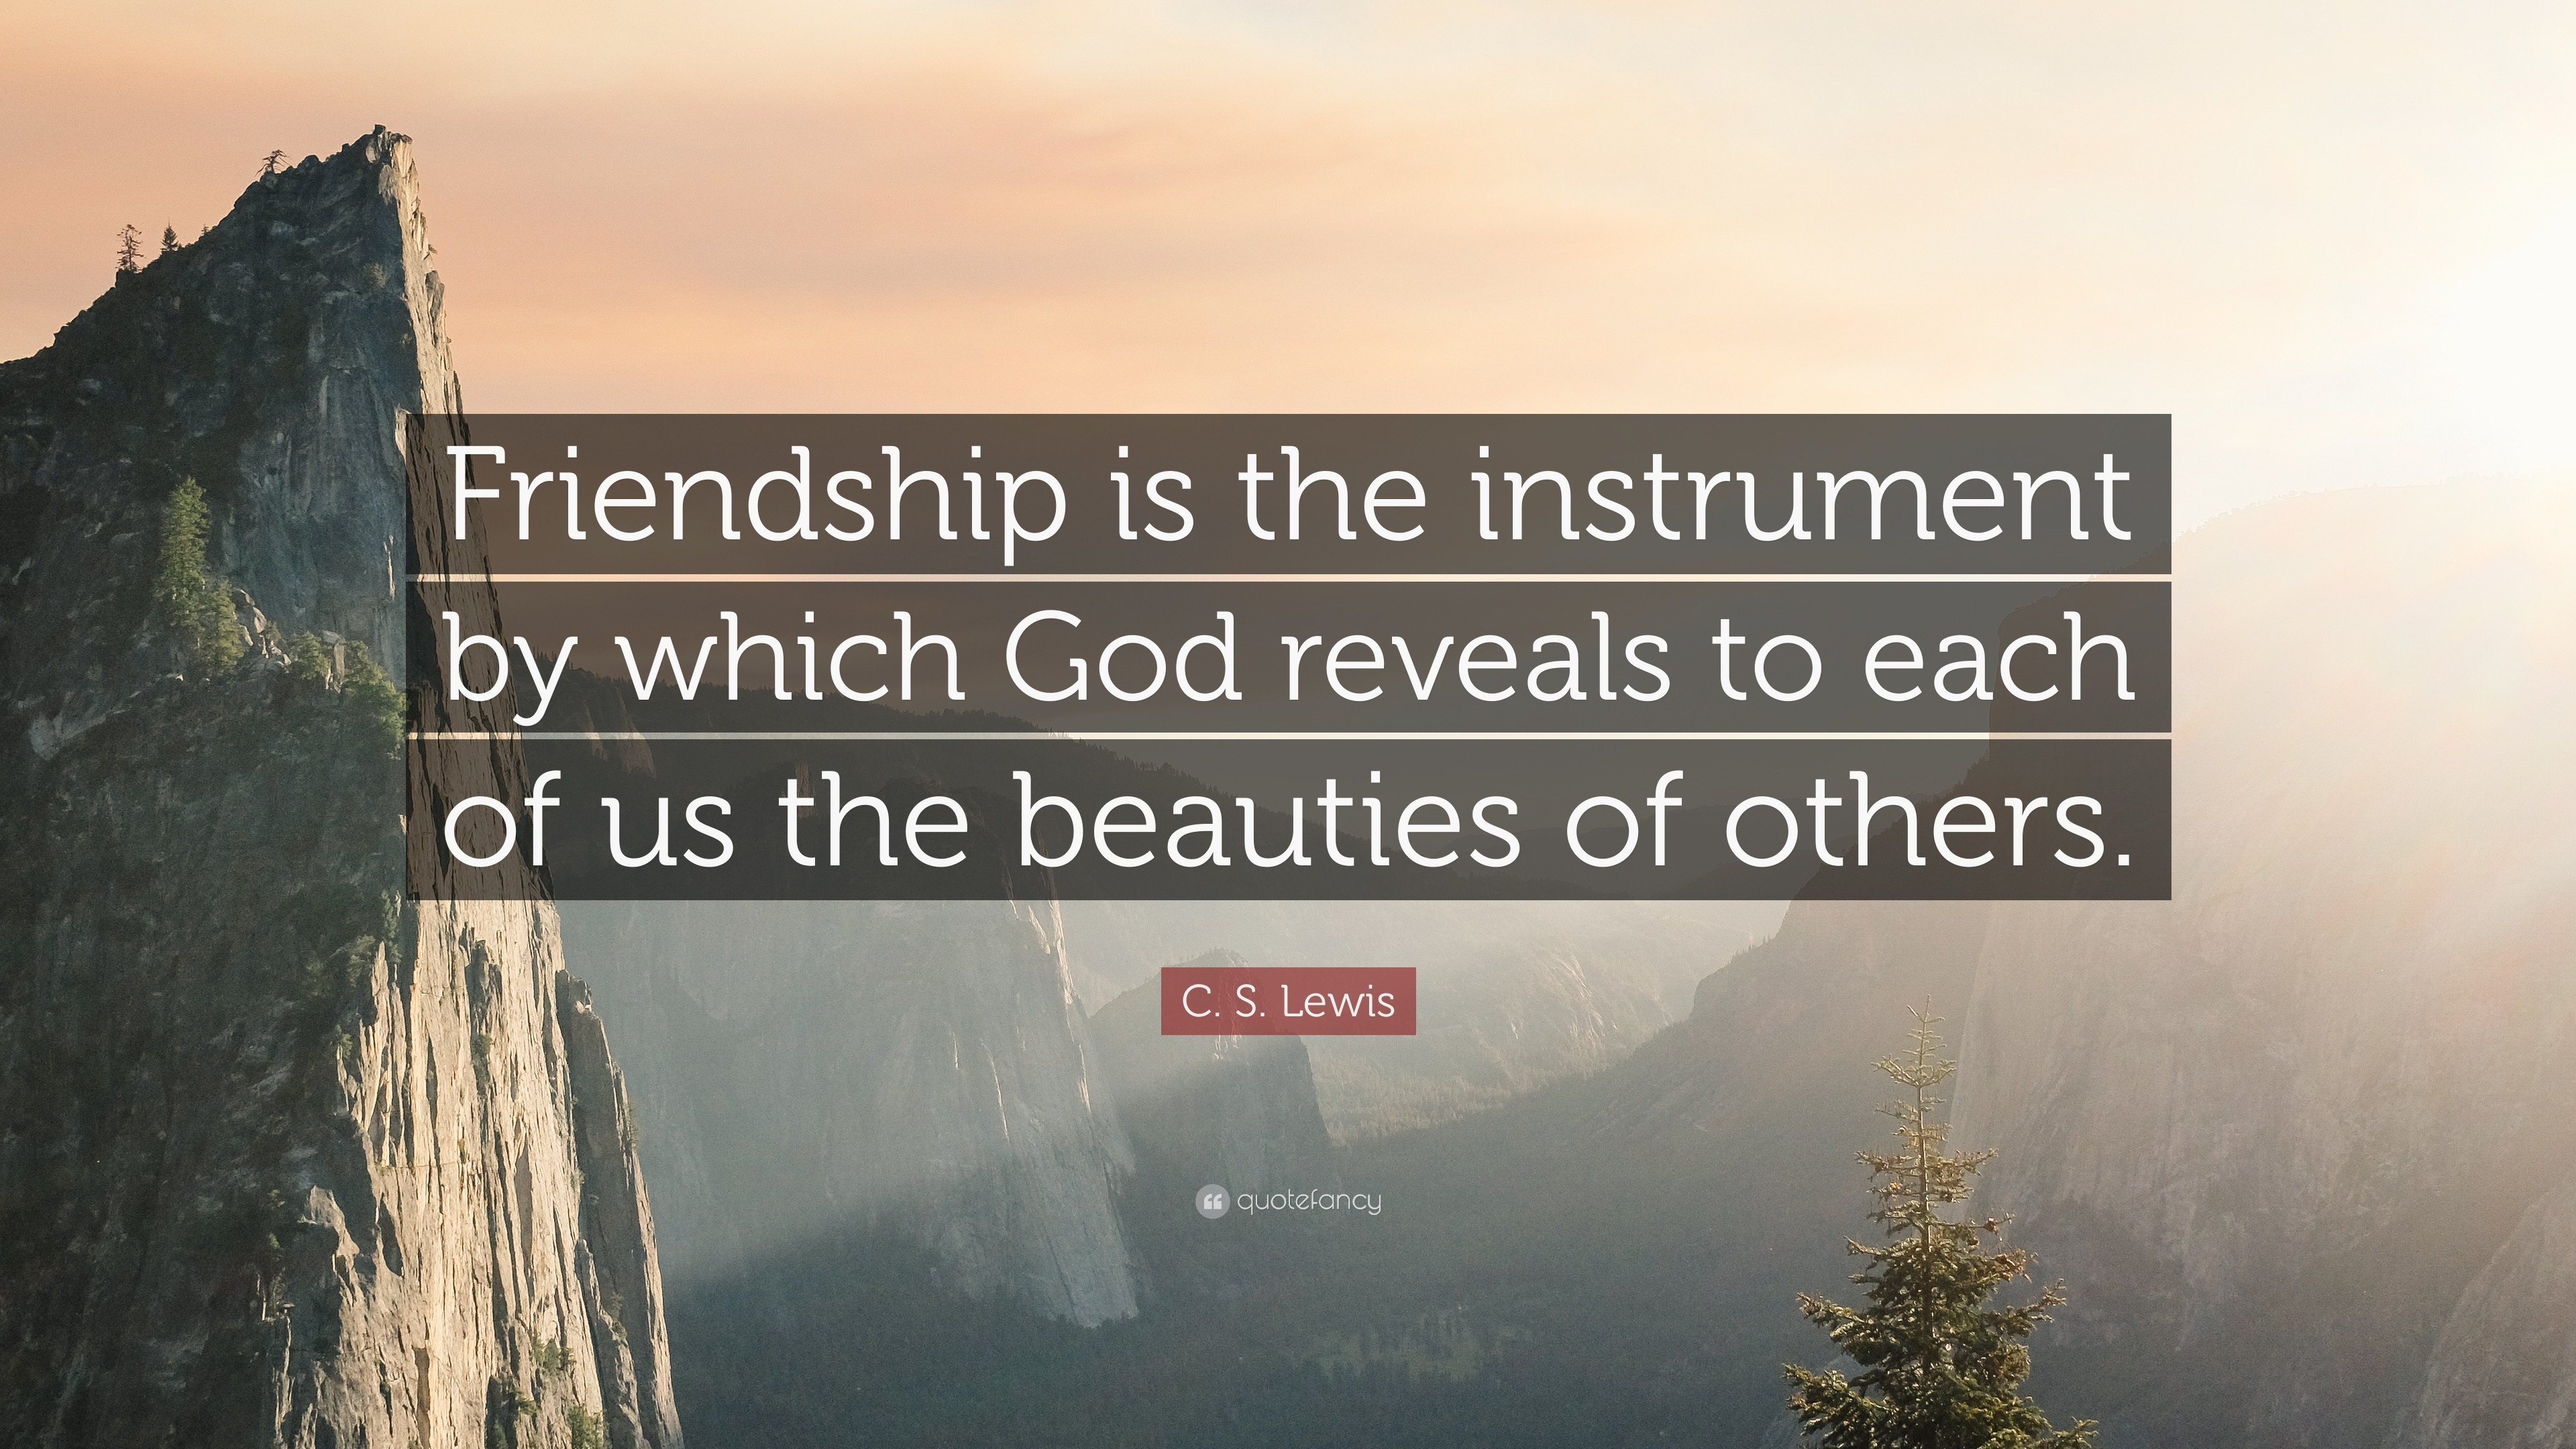 C.S.Lewis Friendship Quotes
 C S Lewis Quote “Friendship is the instrument by which